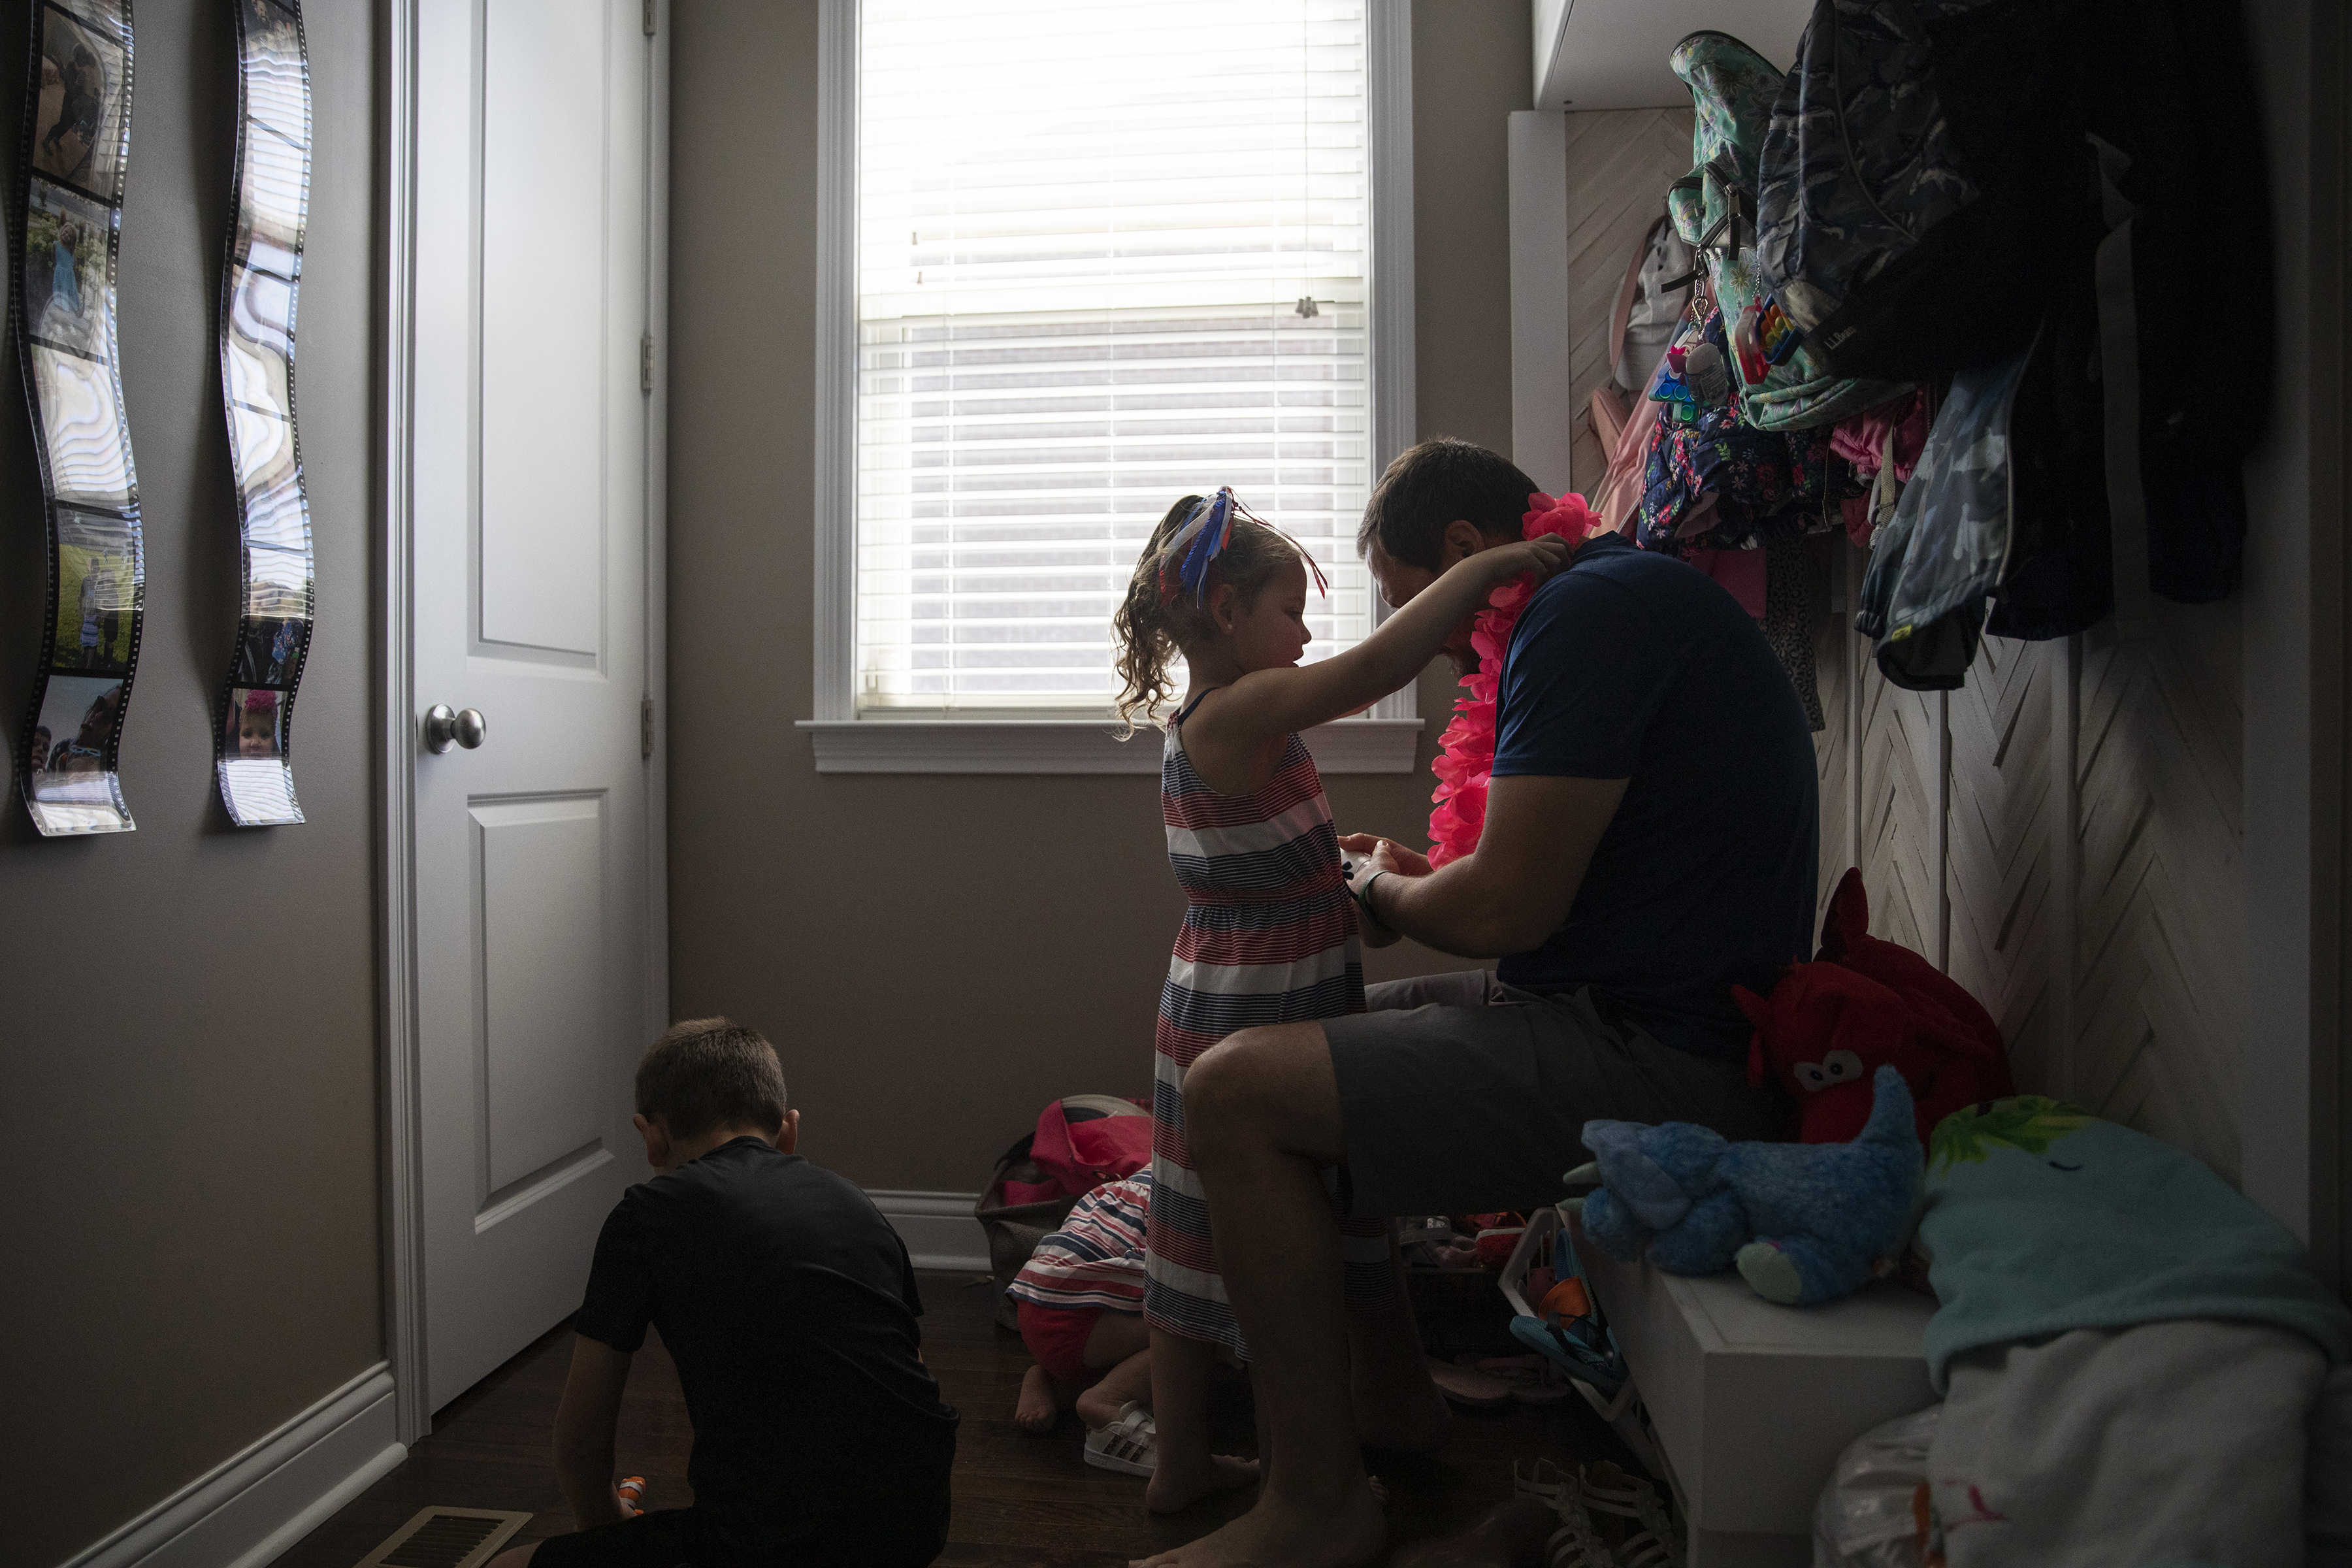 Jack Widders puts sunscreen on his daughter, Liviah, who received a liver transplant in January, before heading outside at their home in Mason, Ohio, May 30, 2022. ÒSheÕs not going to remember a lot of it, which is so great,Ó he said. (Maddie McGarvey/The New York Times)